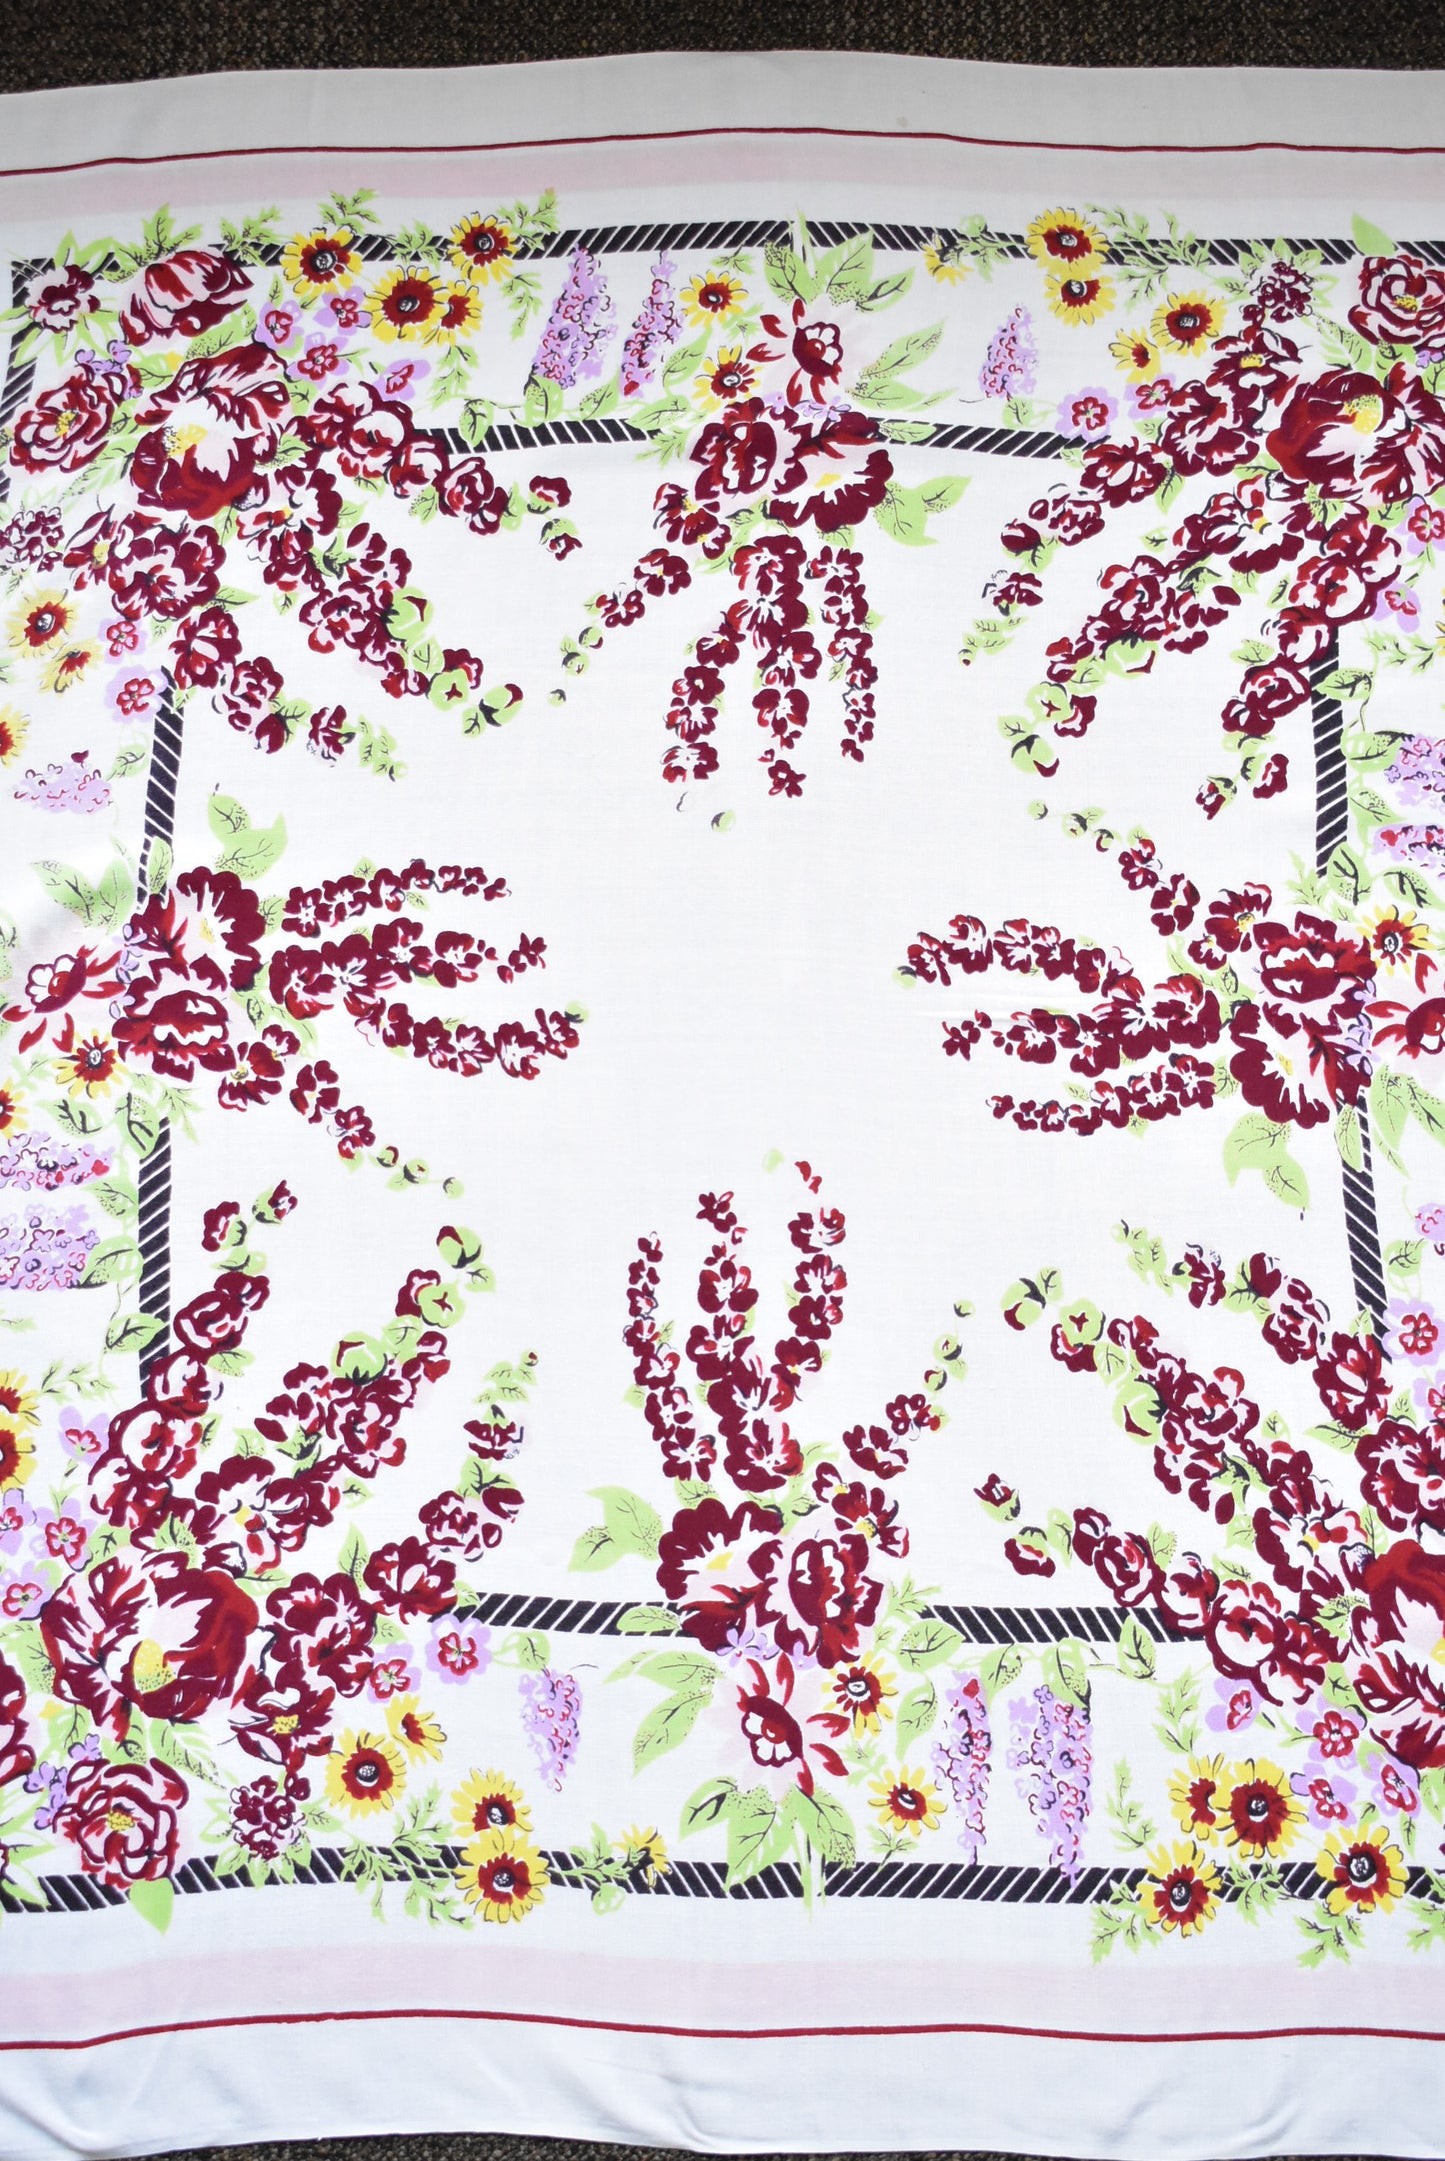 Retro white and maroon floral tablecloth